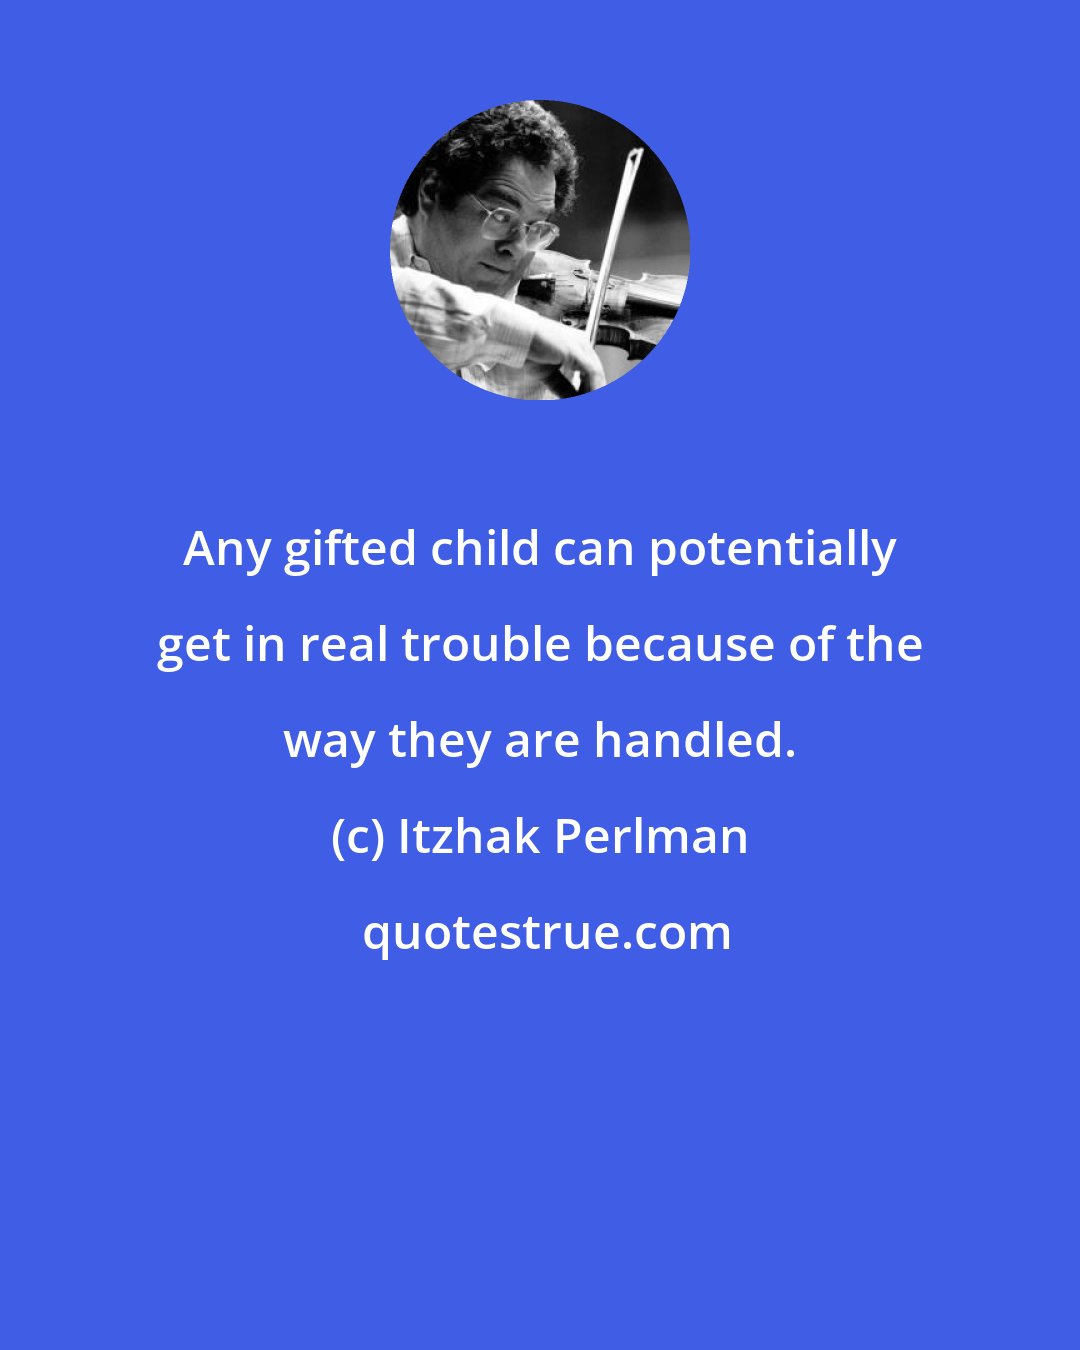 Itzhak Perlman: Any gifted child can potentially get in real trouble because of the way they are handled.